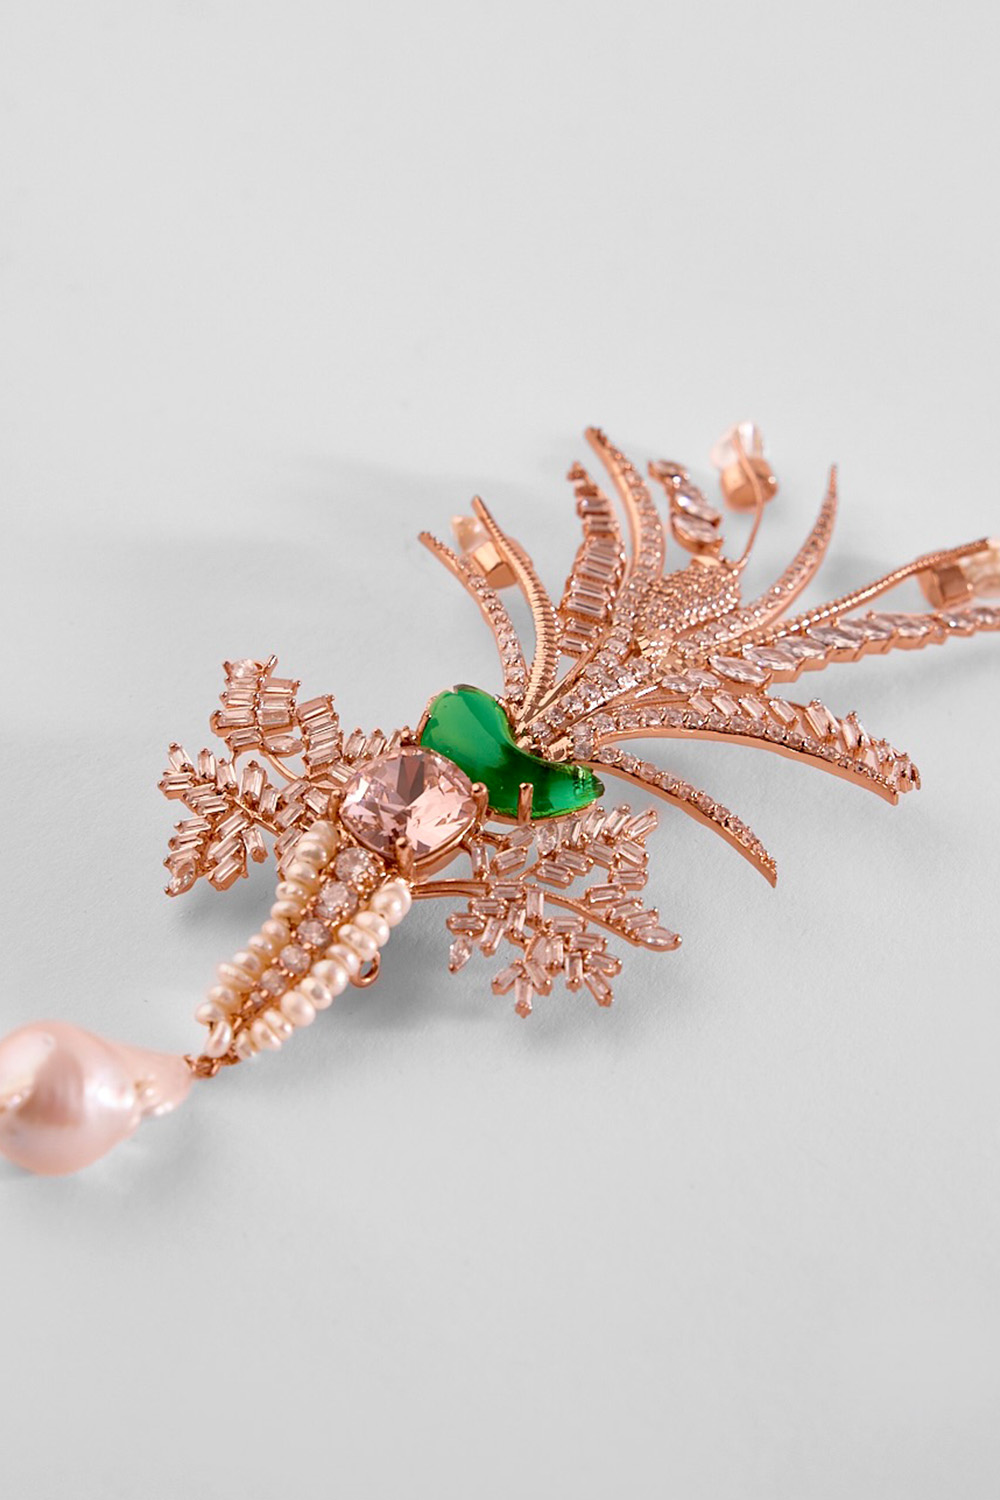 Le Sunset Palm Brooch in Jade Green